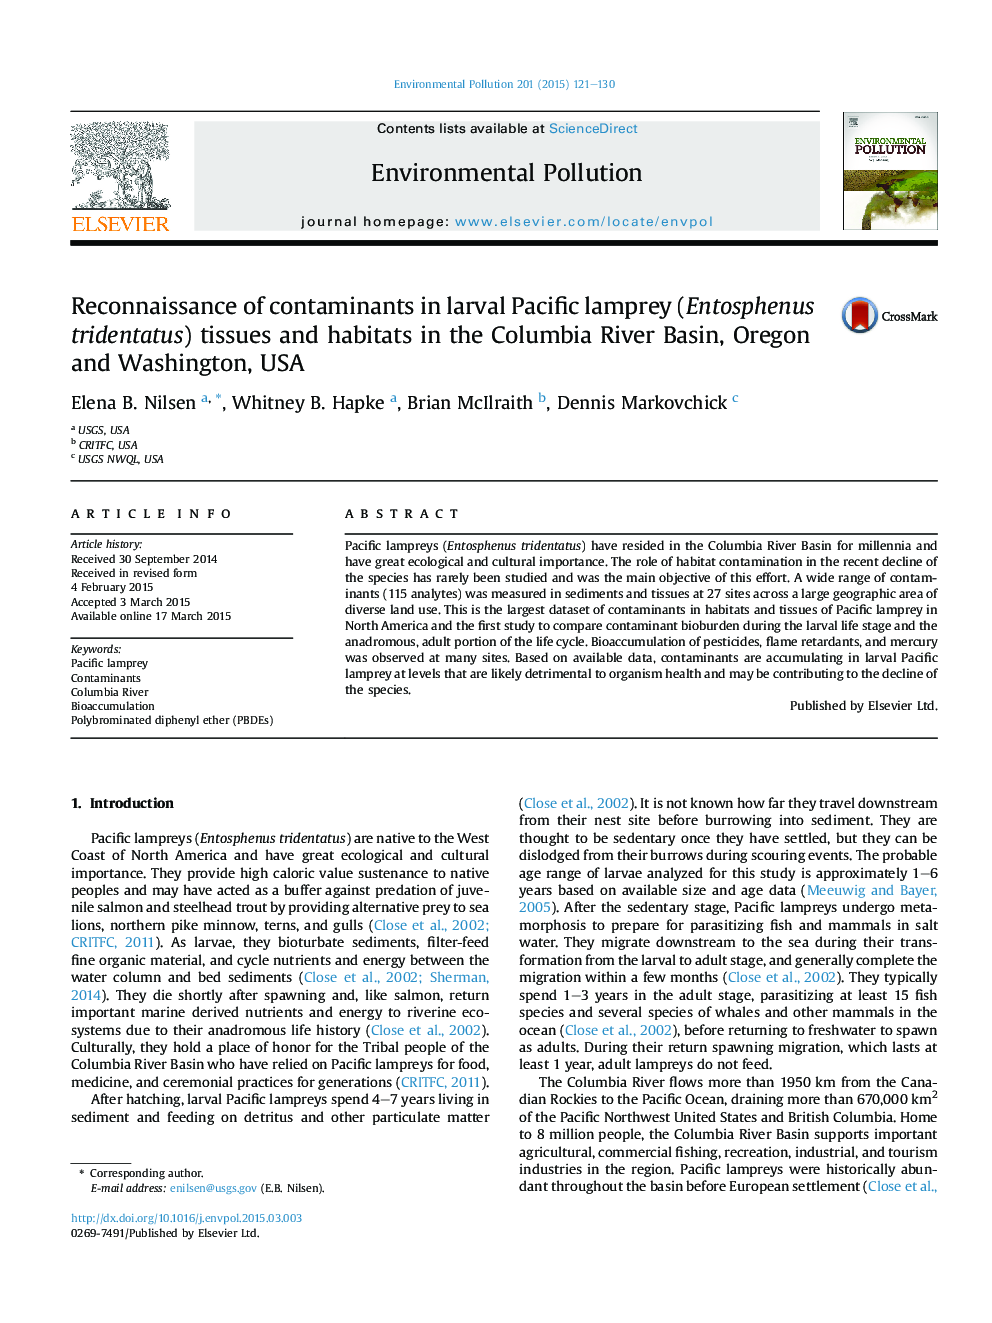 Reconnaissance of contaminants in larval Pacific lamprey (Entosphenus tridentatus) tissues and habitats in the Columbia River Basin, Oregon and Washington, USA